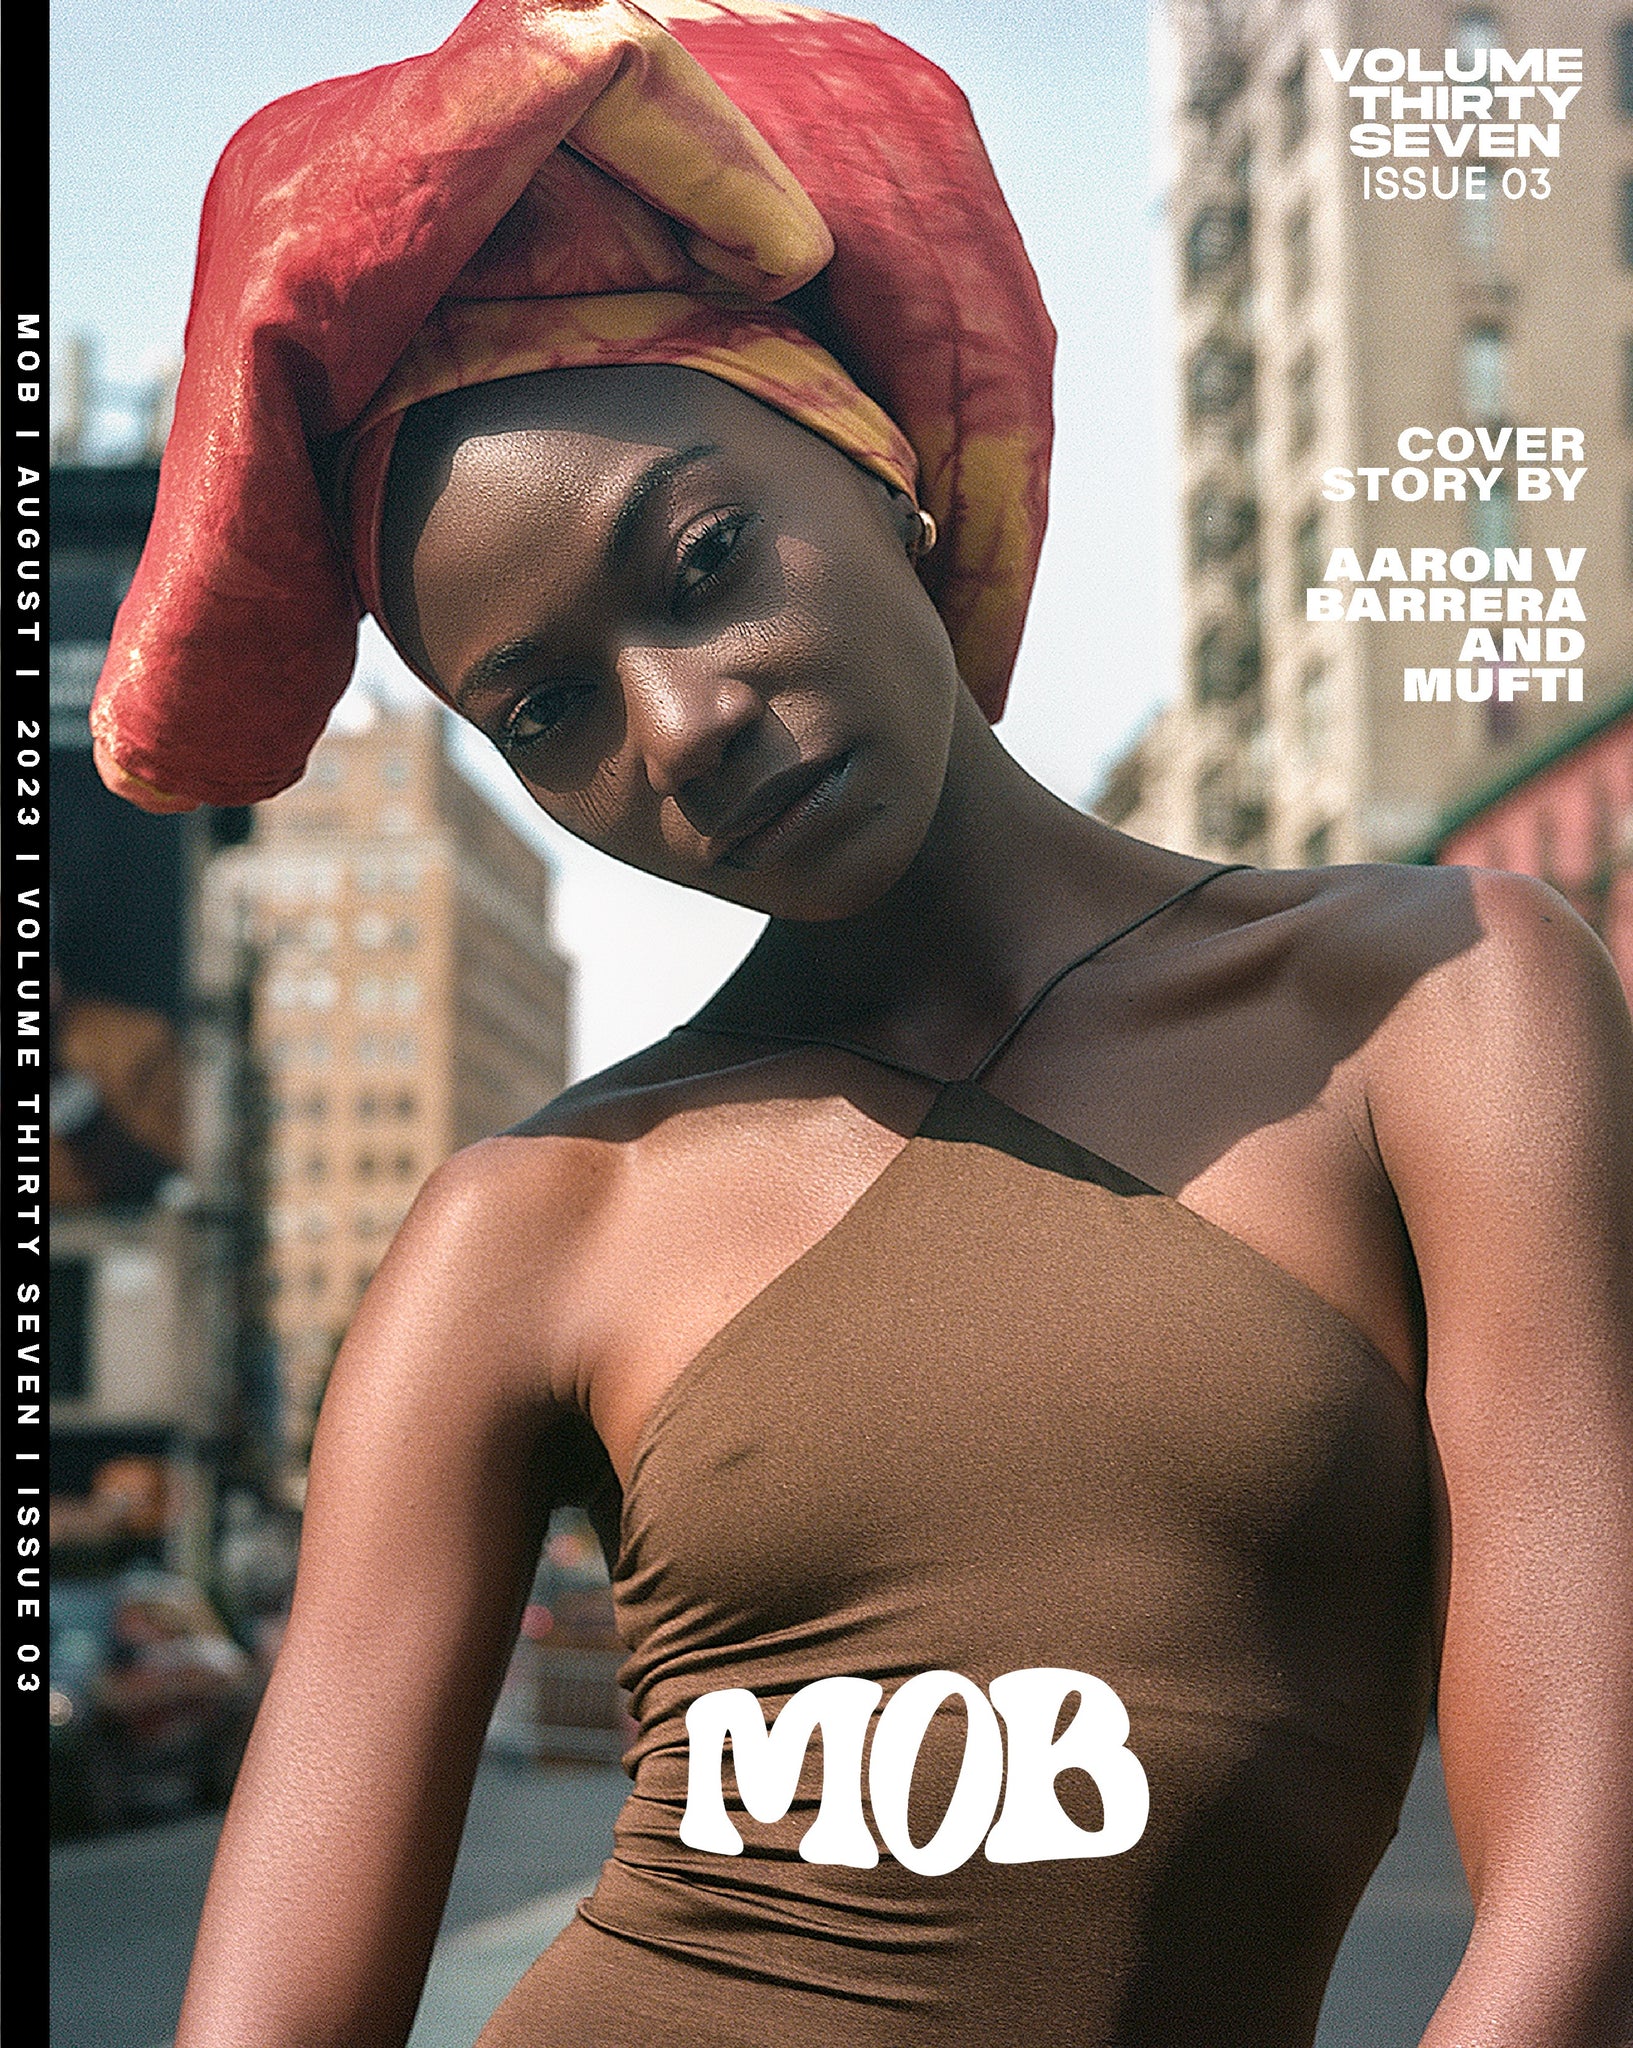 MOB JOURNAL | VOLUME THIRTY SEVEN | ISSUE #03